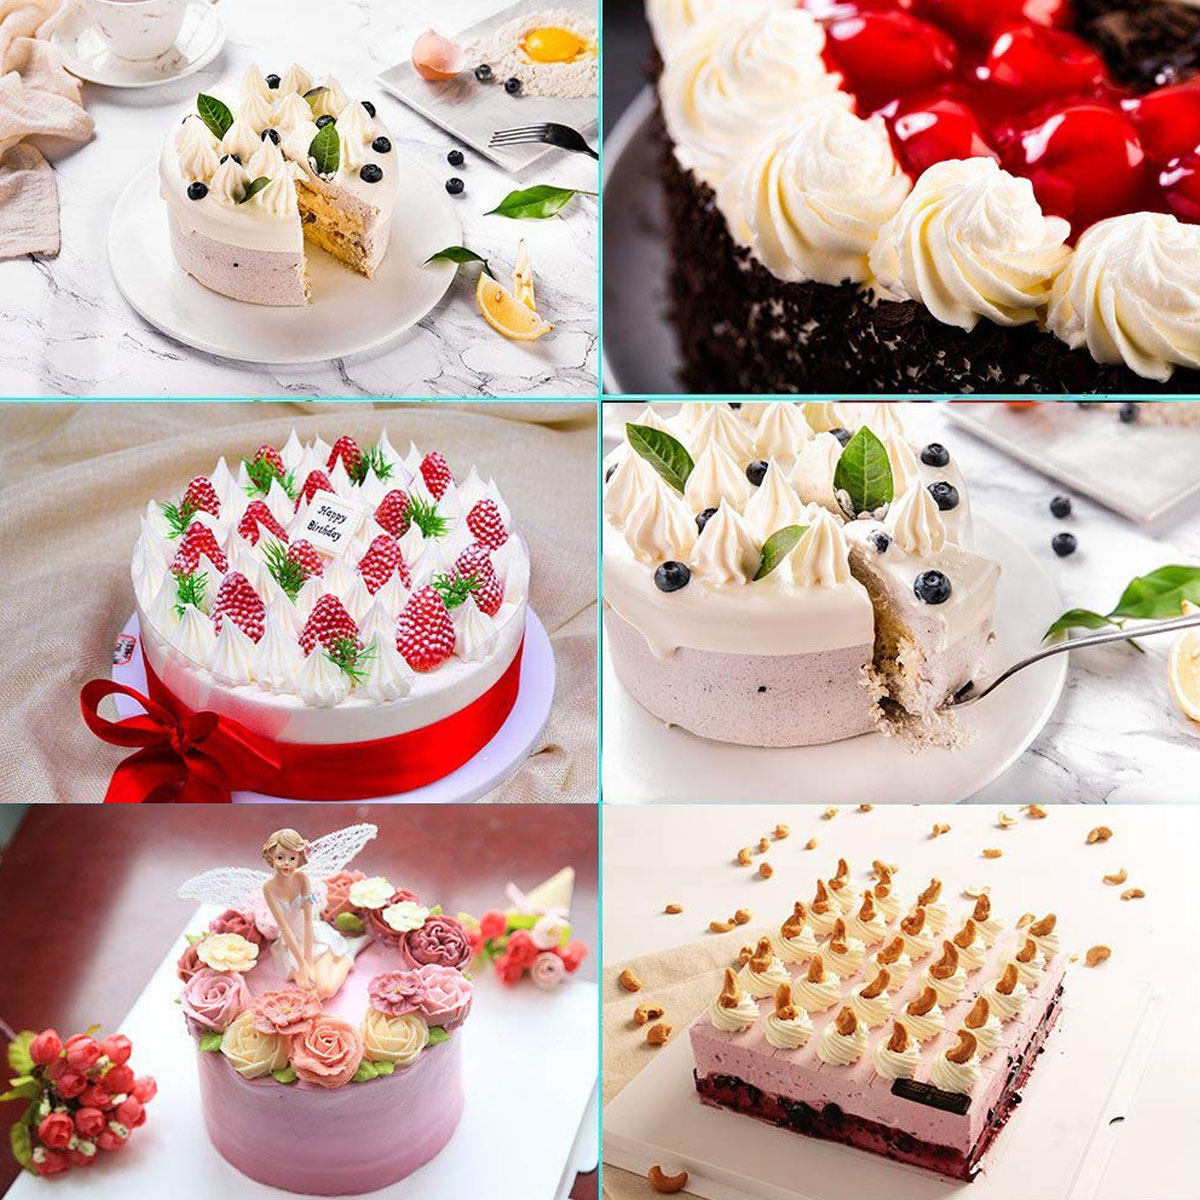 Find 46PCS Cake Turntable Cake Decorating Tools Kit Rotary Table Baking Tool Piping Nozzle Piping Bag Set Baking Supplies Sets for Sale on Gipsybee.com with cryptocurrencies